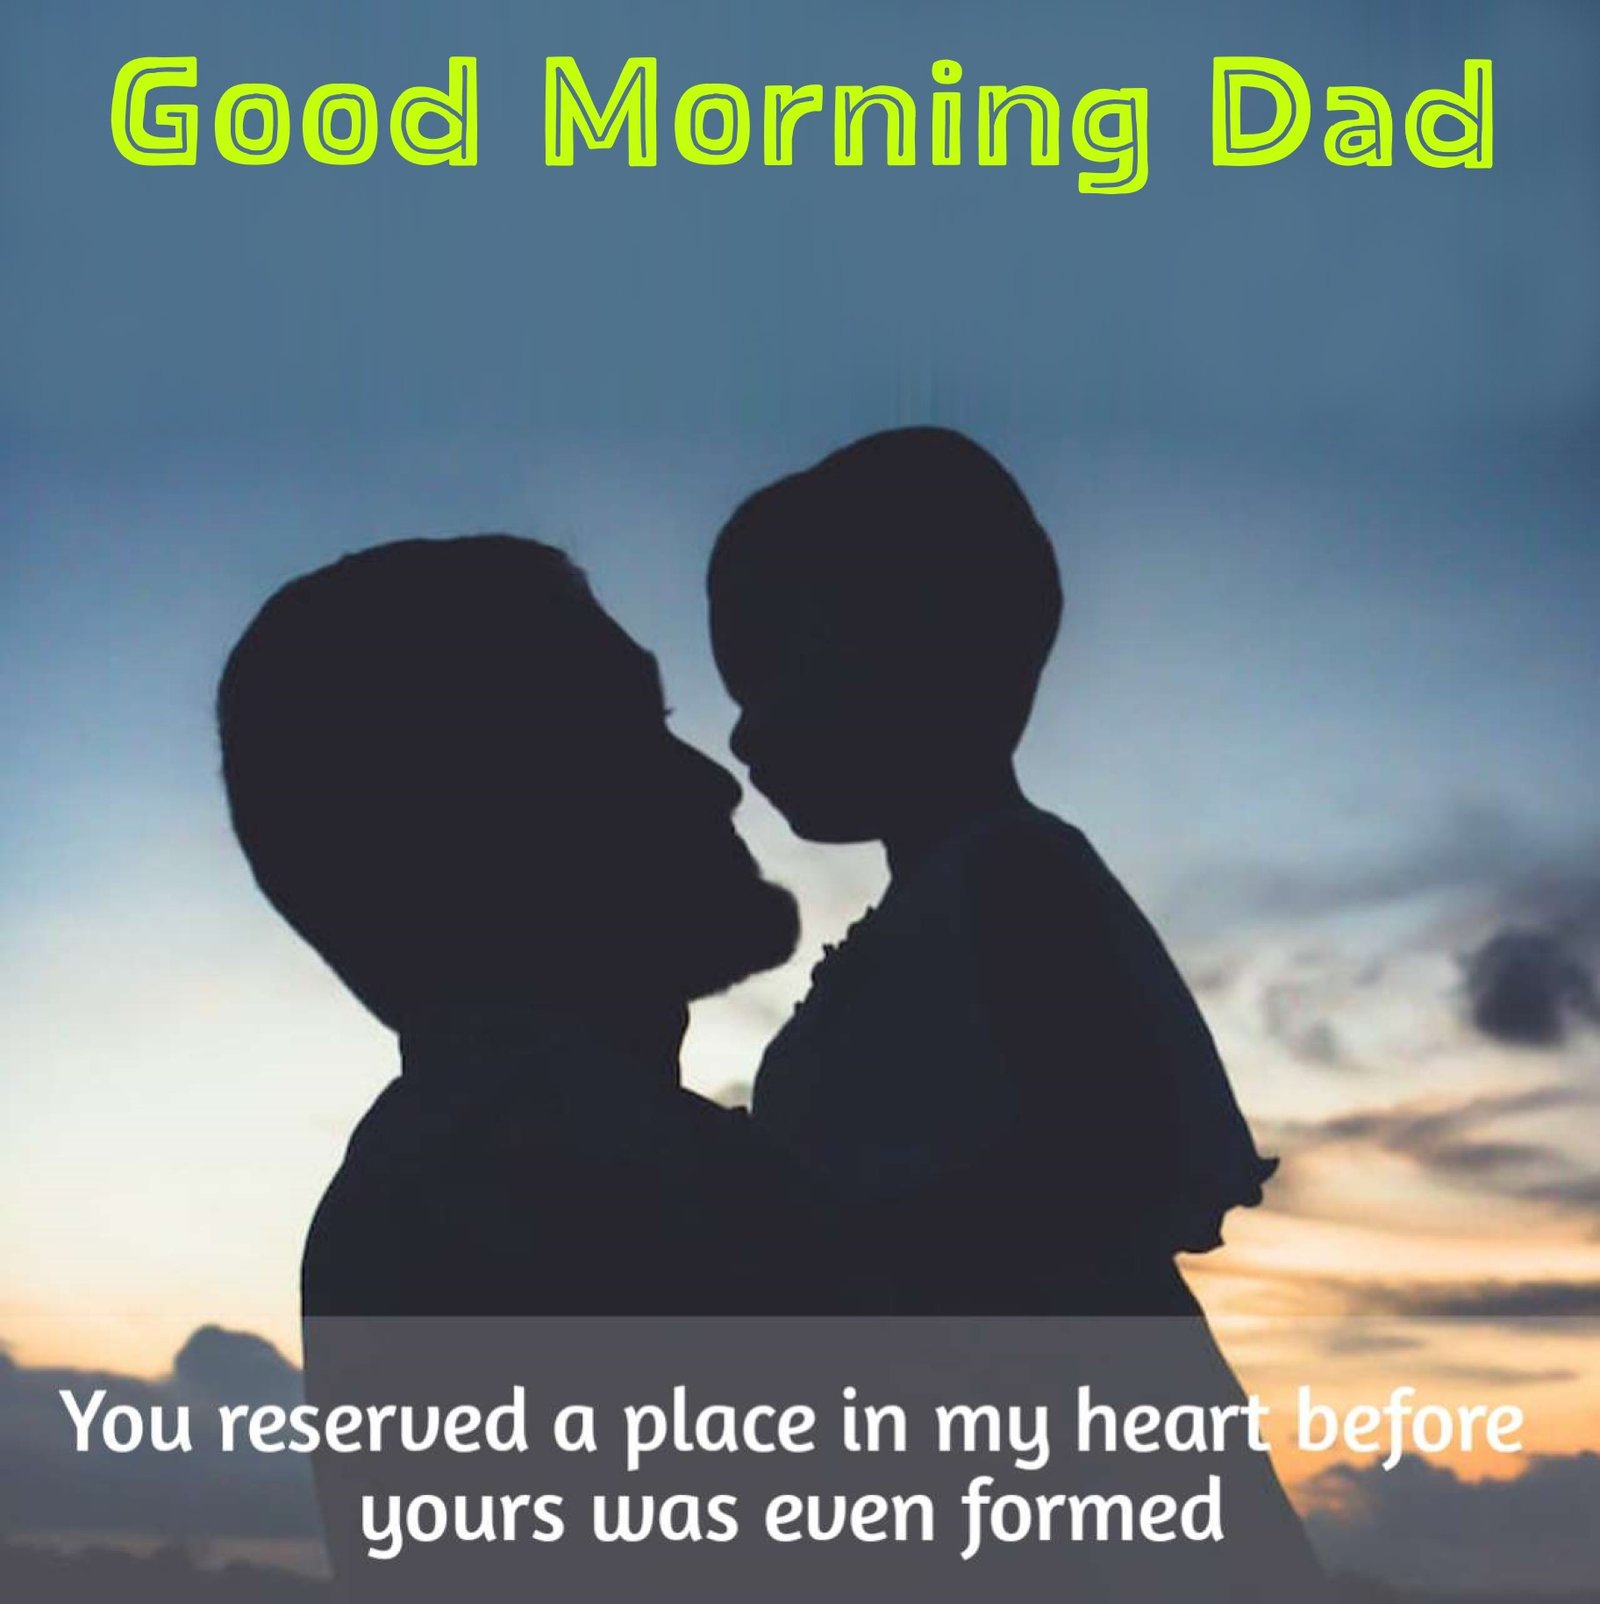 New Style Good Morning Dad Quotes 2023 Images Whatsapp 4K Common